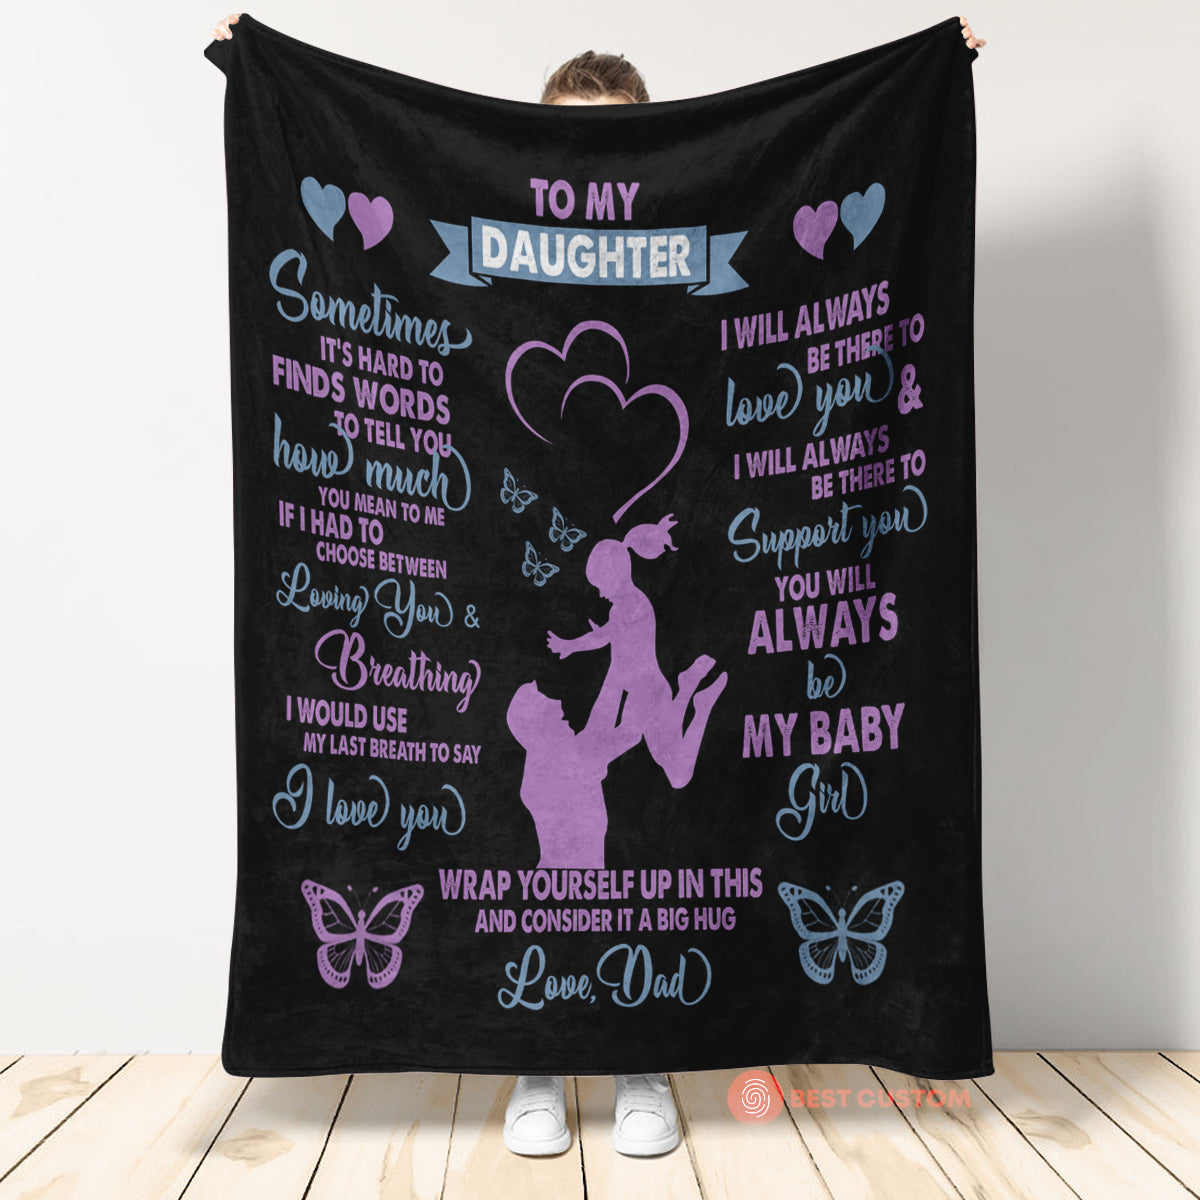 To My Daughter You Will Always Be My Baby Girl Fleece Blanket Love From Dad, Gift For Family Home Decor Bedding Couch Sofa Soft And Comfy Cozy 1664437860599.jpg